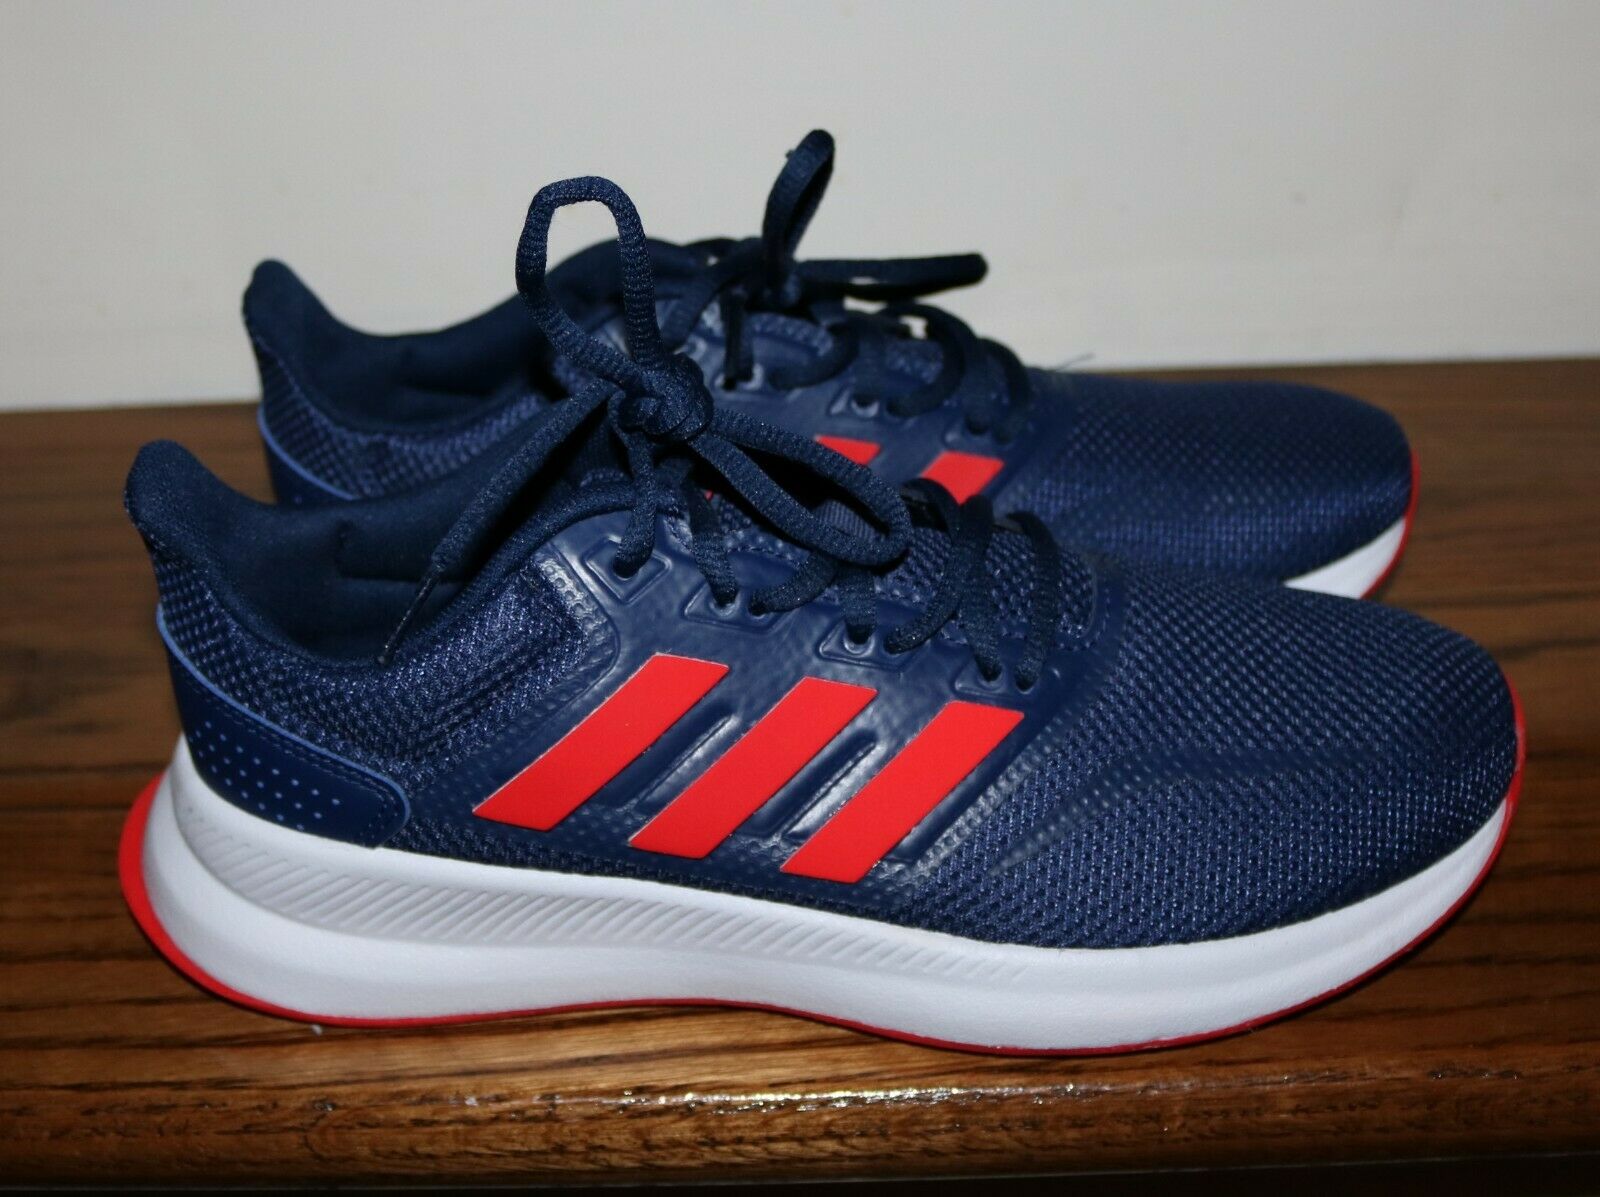 Women's Adidas Runfalcon Navy Blue and Red Athletic Shoes - Size 6M - NWOT